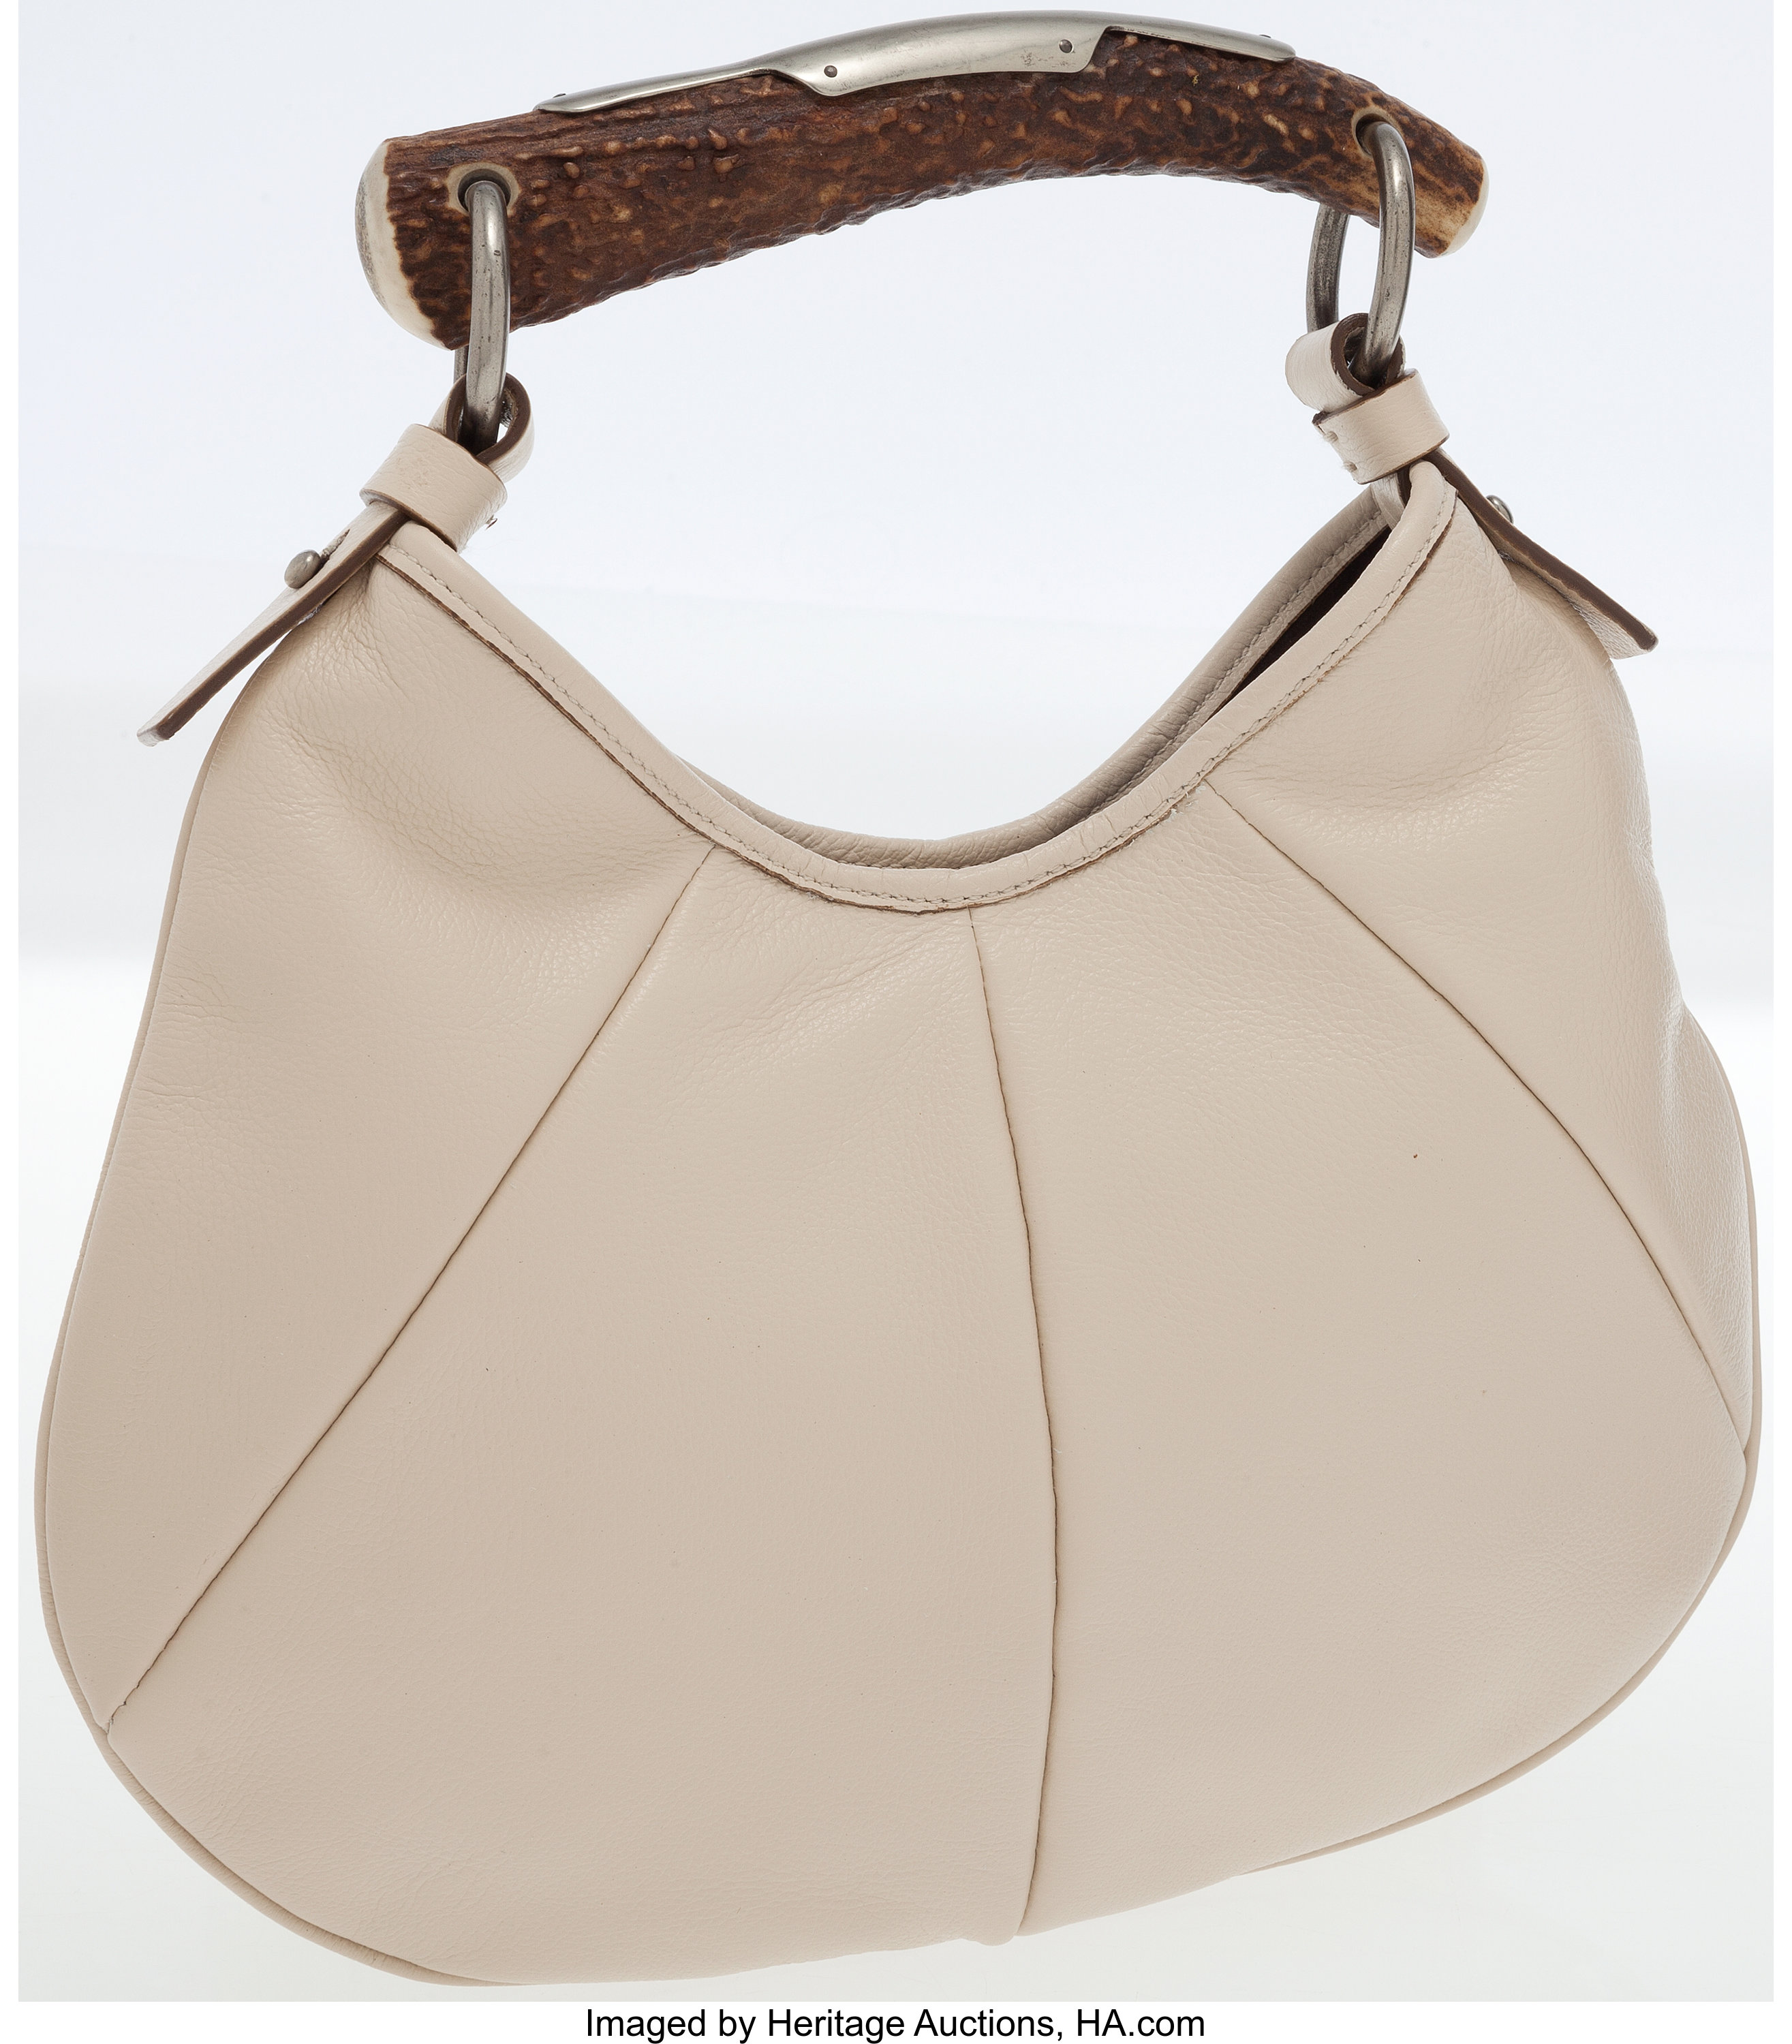 Yves Saint Laurent Beige Leather Small Mombasa Bag by Tom Ford. , Lot  #79033